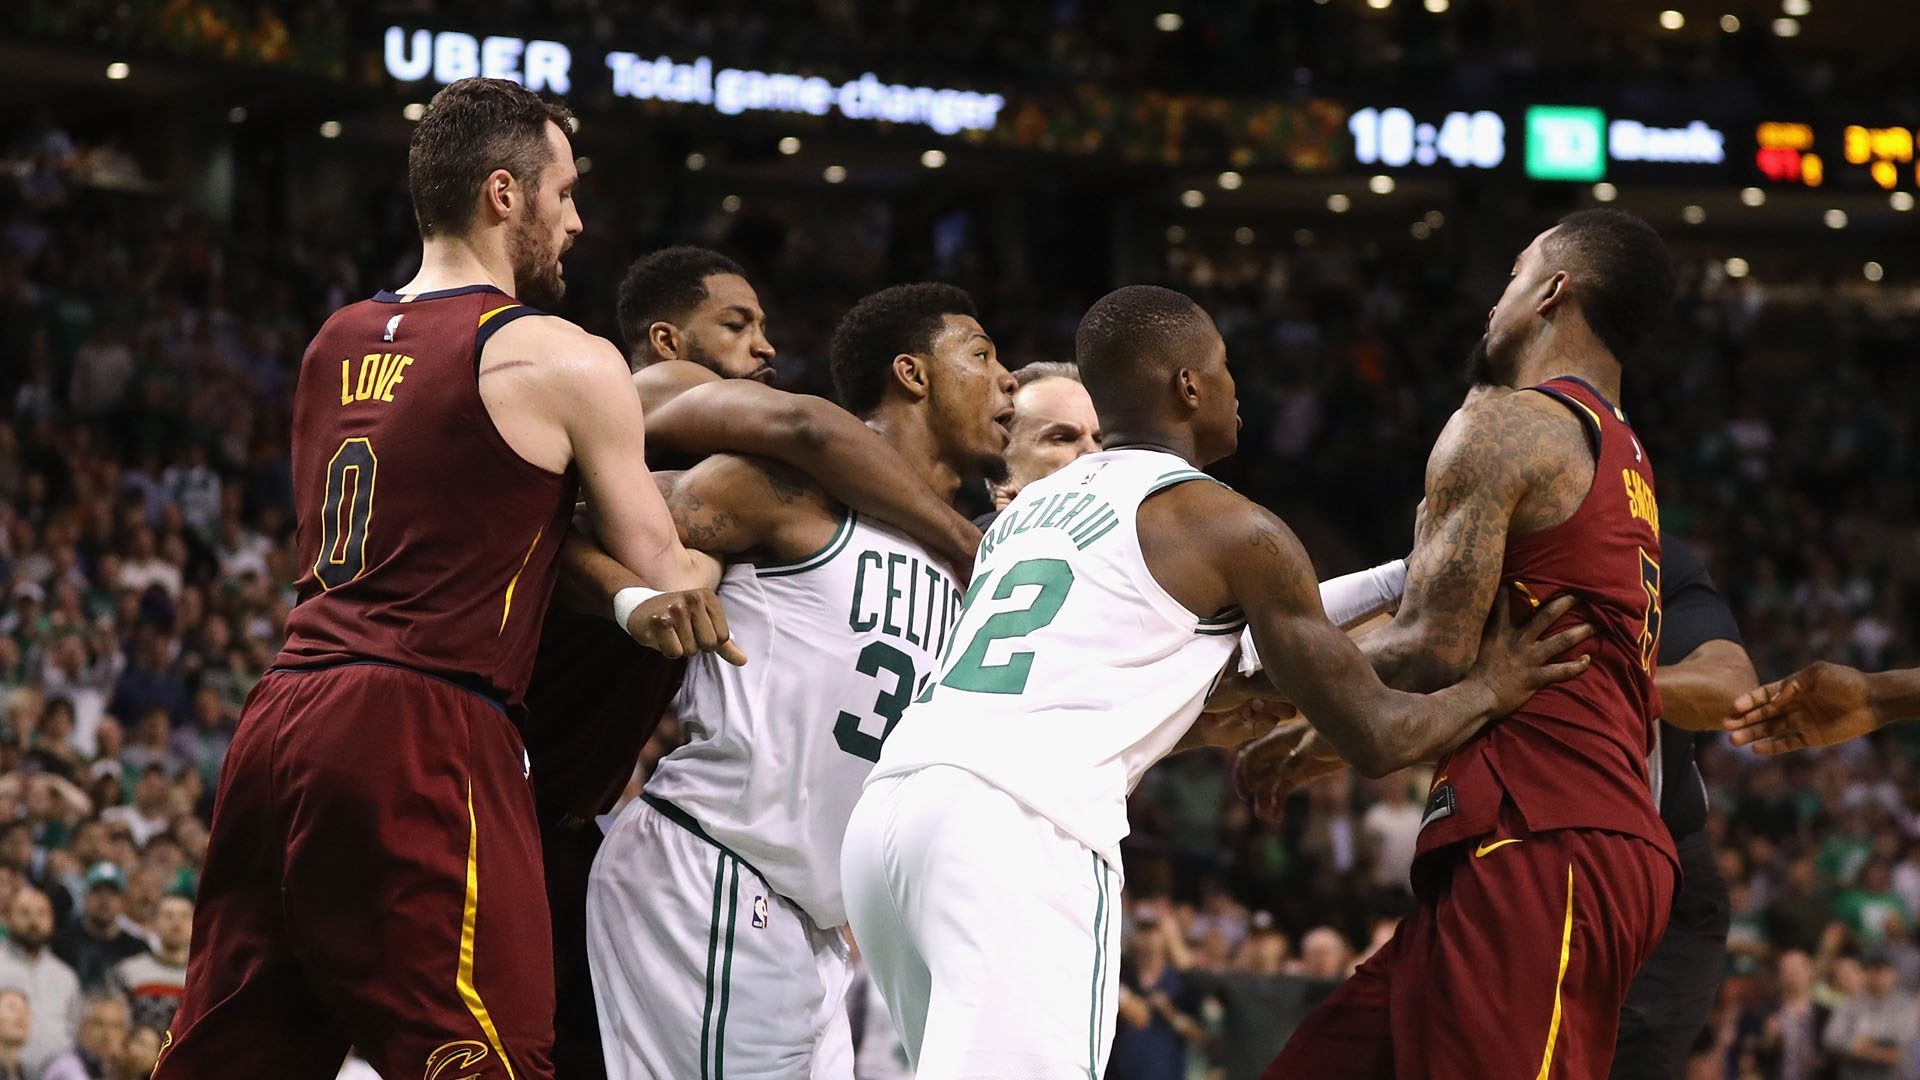 Marcus Smart And Jr Smith Scuffle - HD Wallpaper 